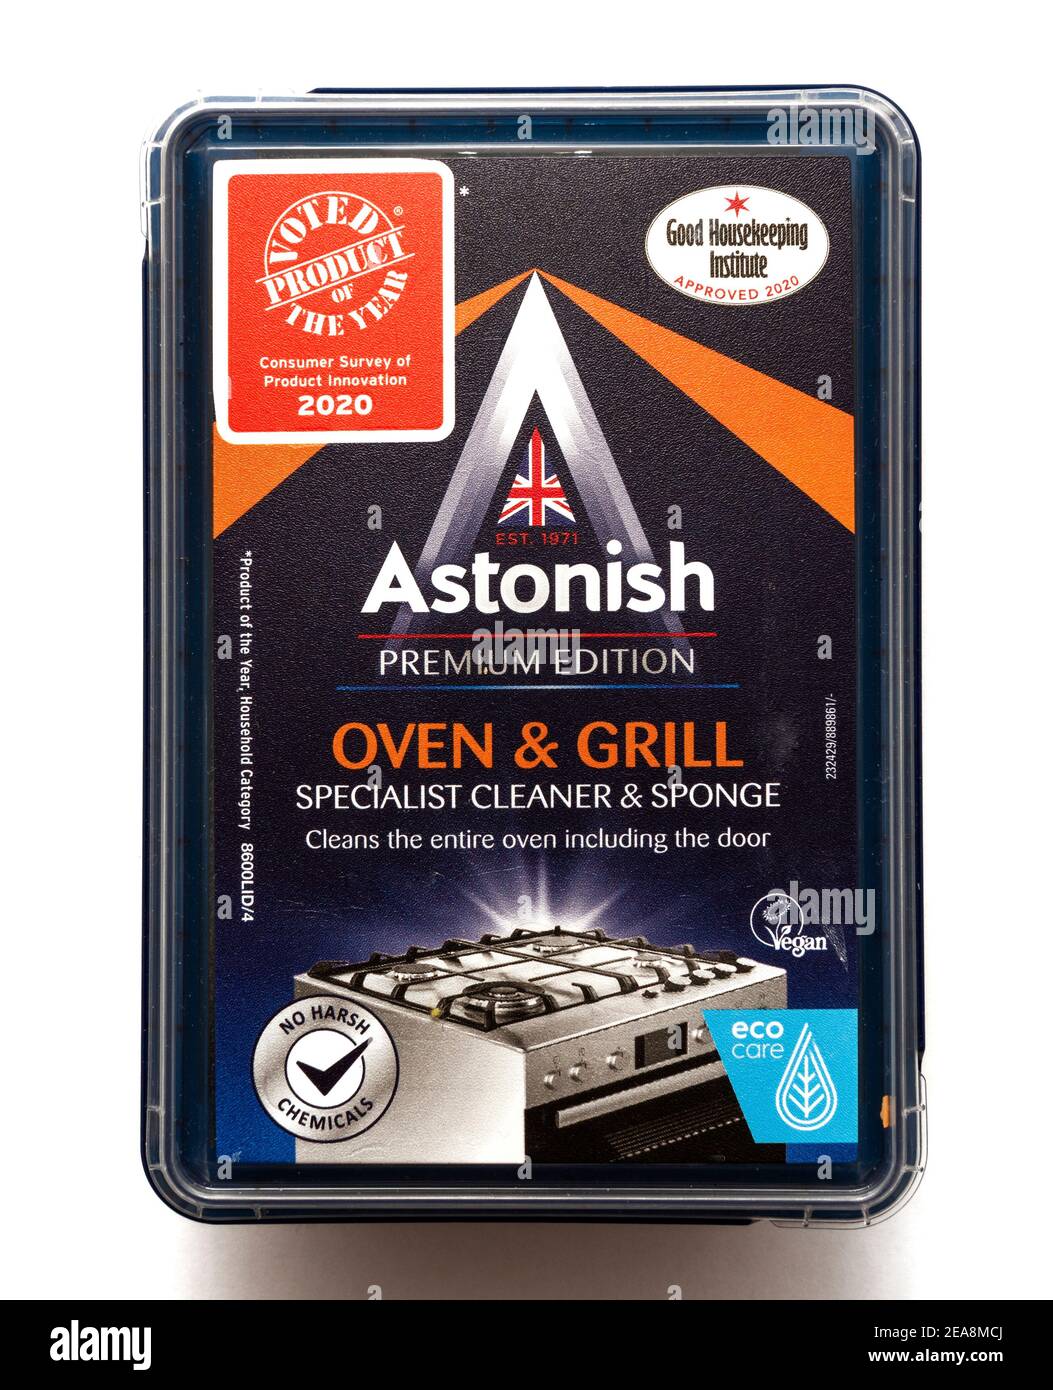 Astonish premium edition oven & grill specialist cleaner and sponge voted product of the year 2020 Stock Photo